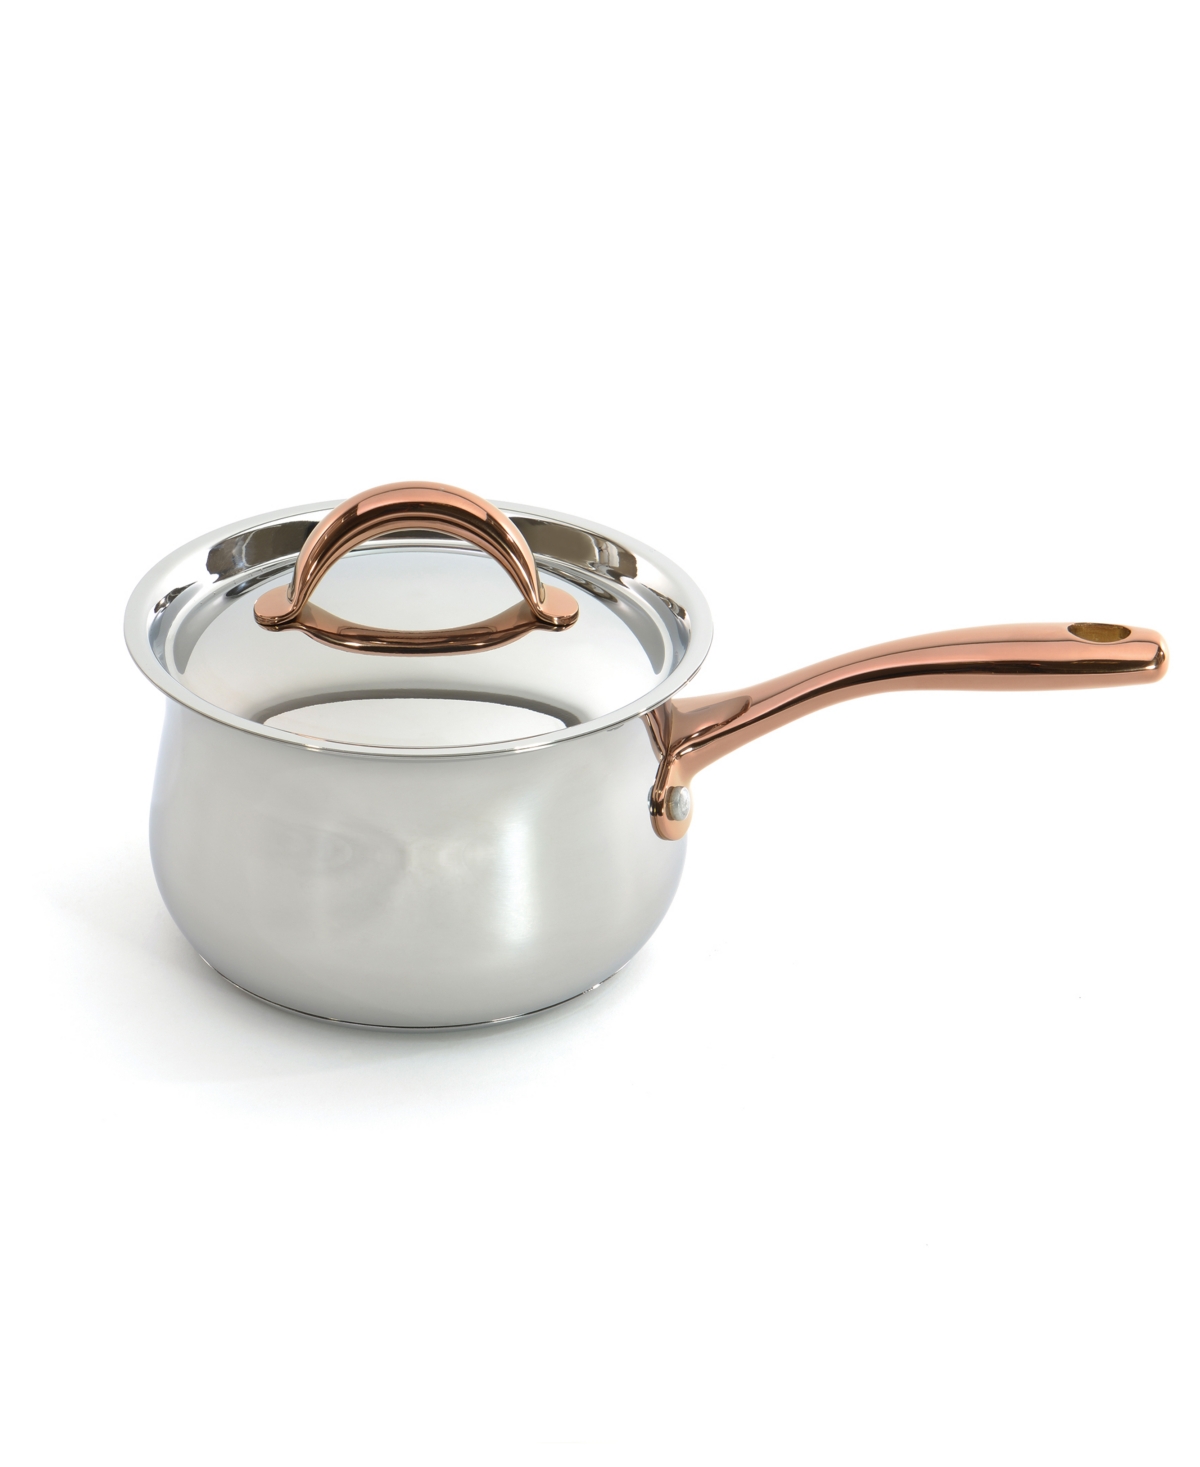 12444996 Ouro Stainless Steel 6.25 Covered Saucepan sku 12444996